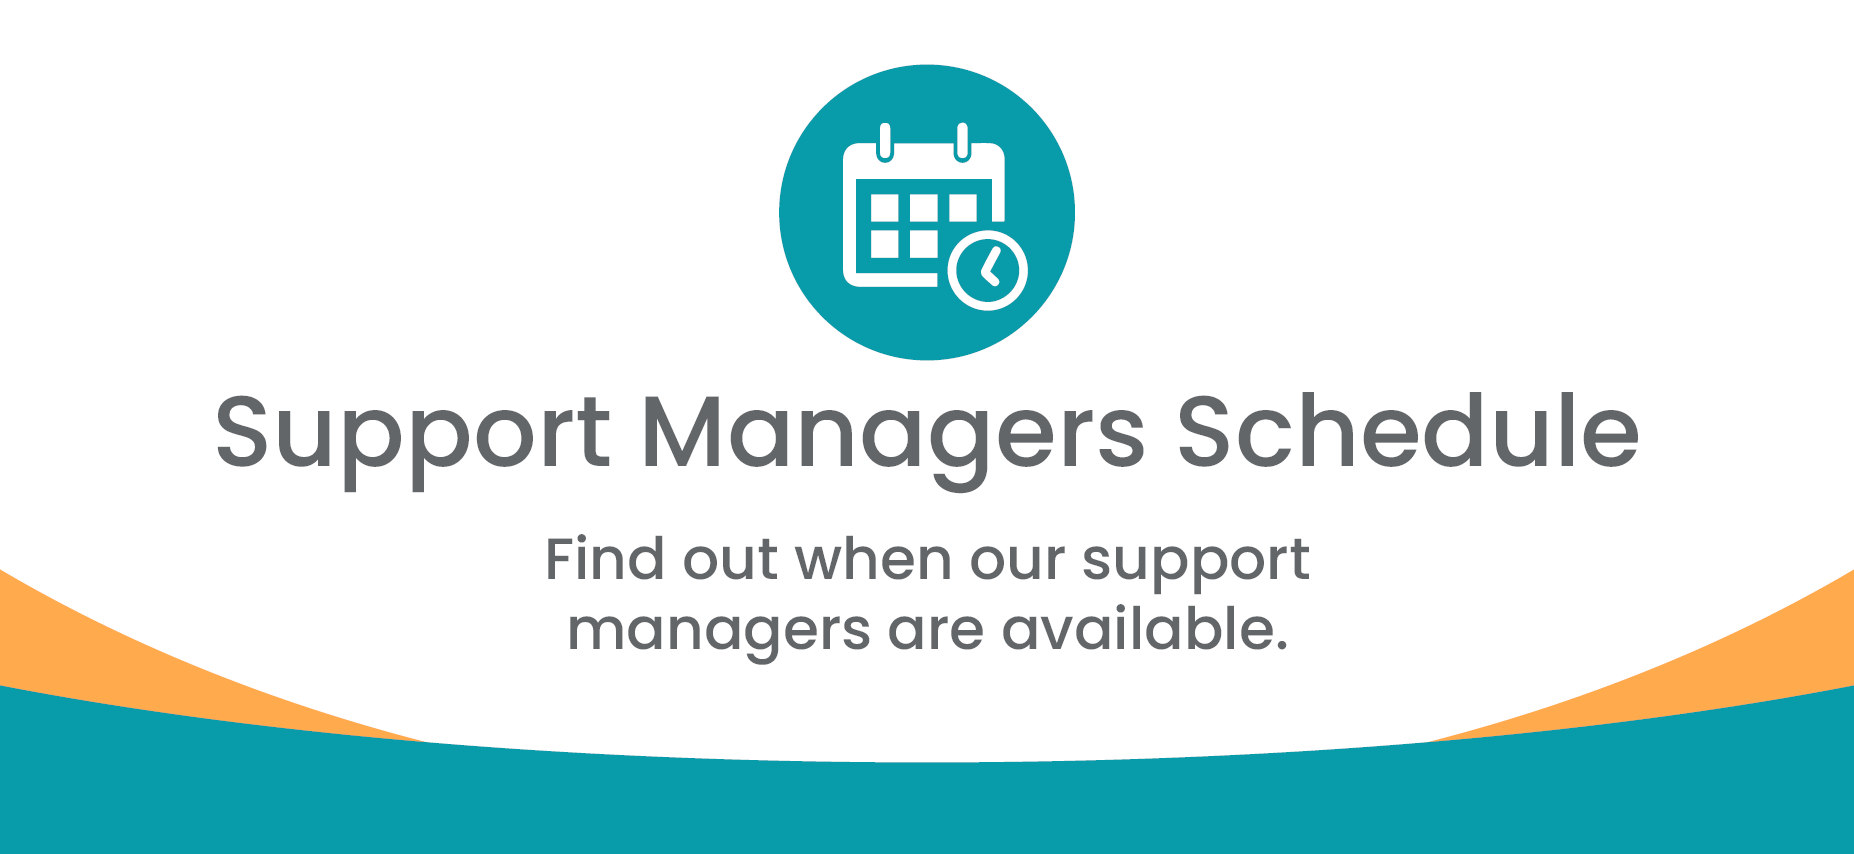 Support Managers Schedule